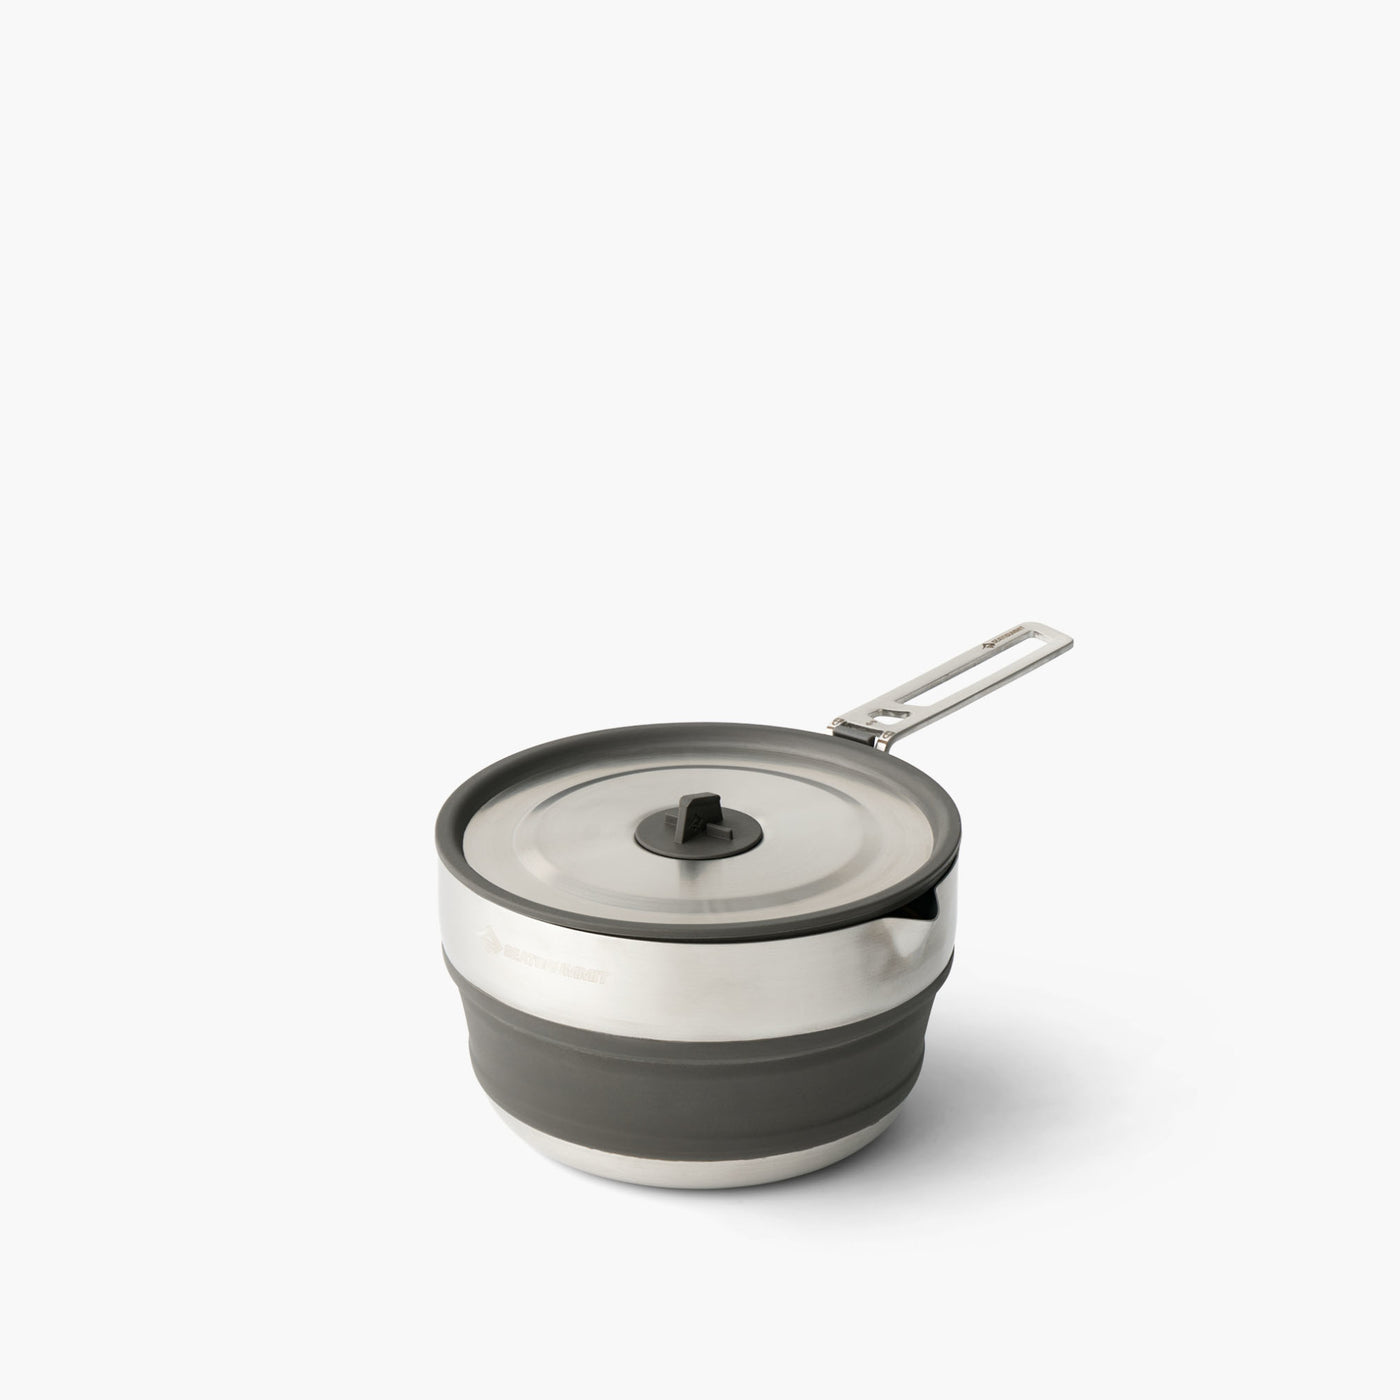 Detour Stainless Steel Collapsible Pouring Pot - 1.8L